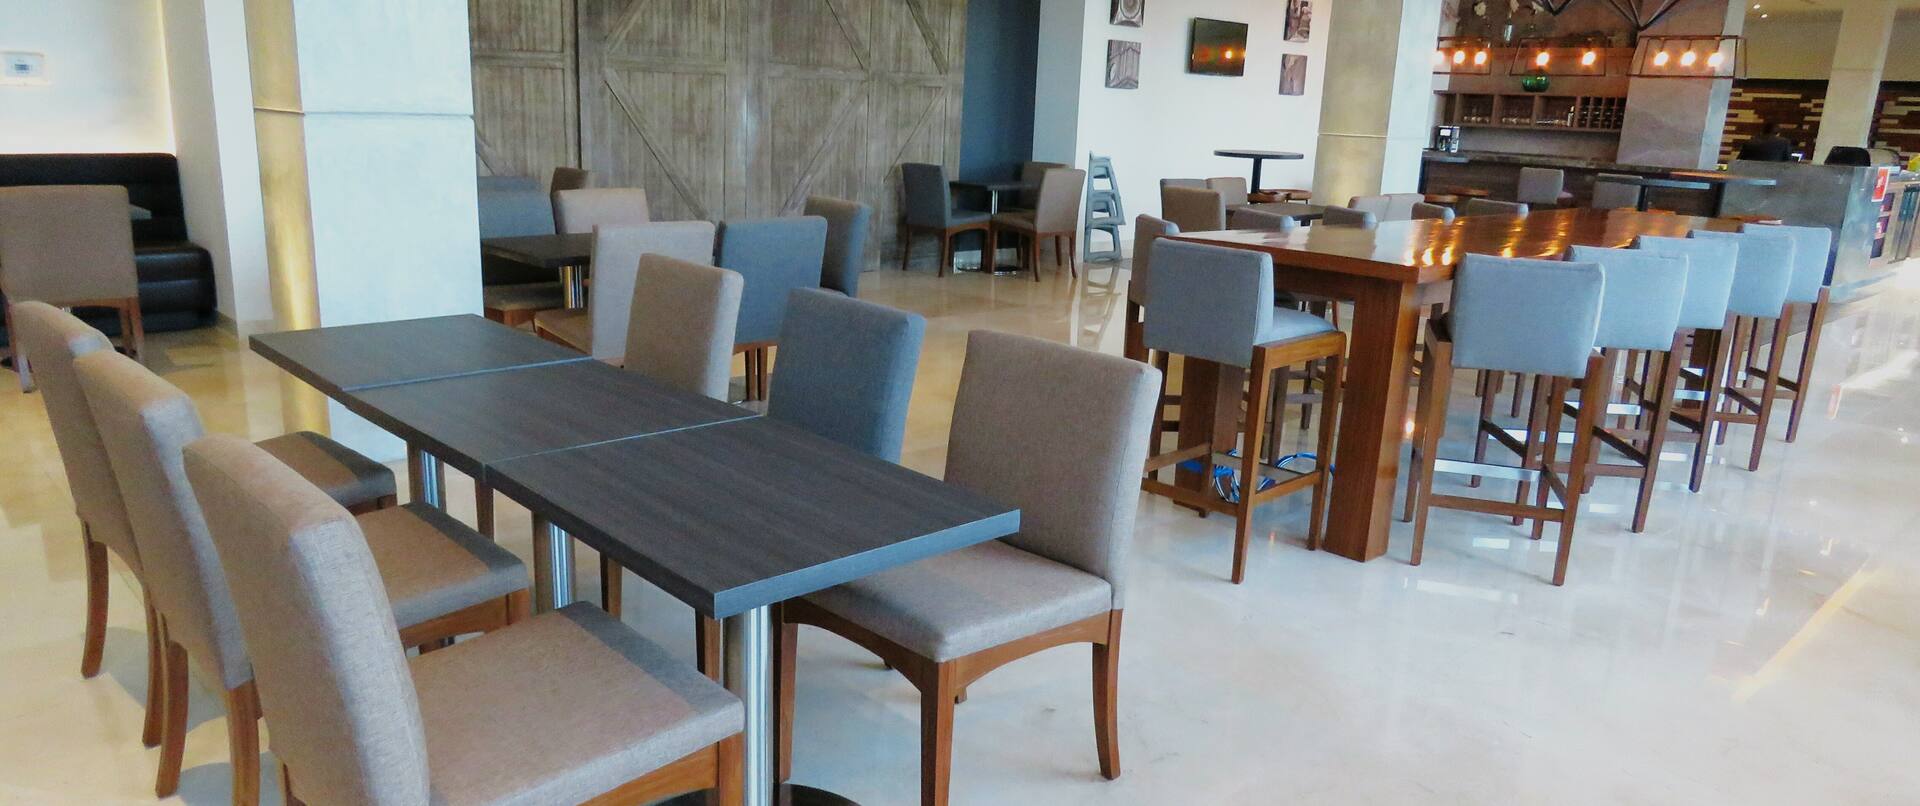 Breakfast Dining Area with Chairs and Tables